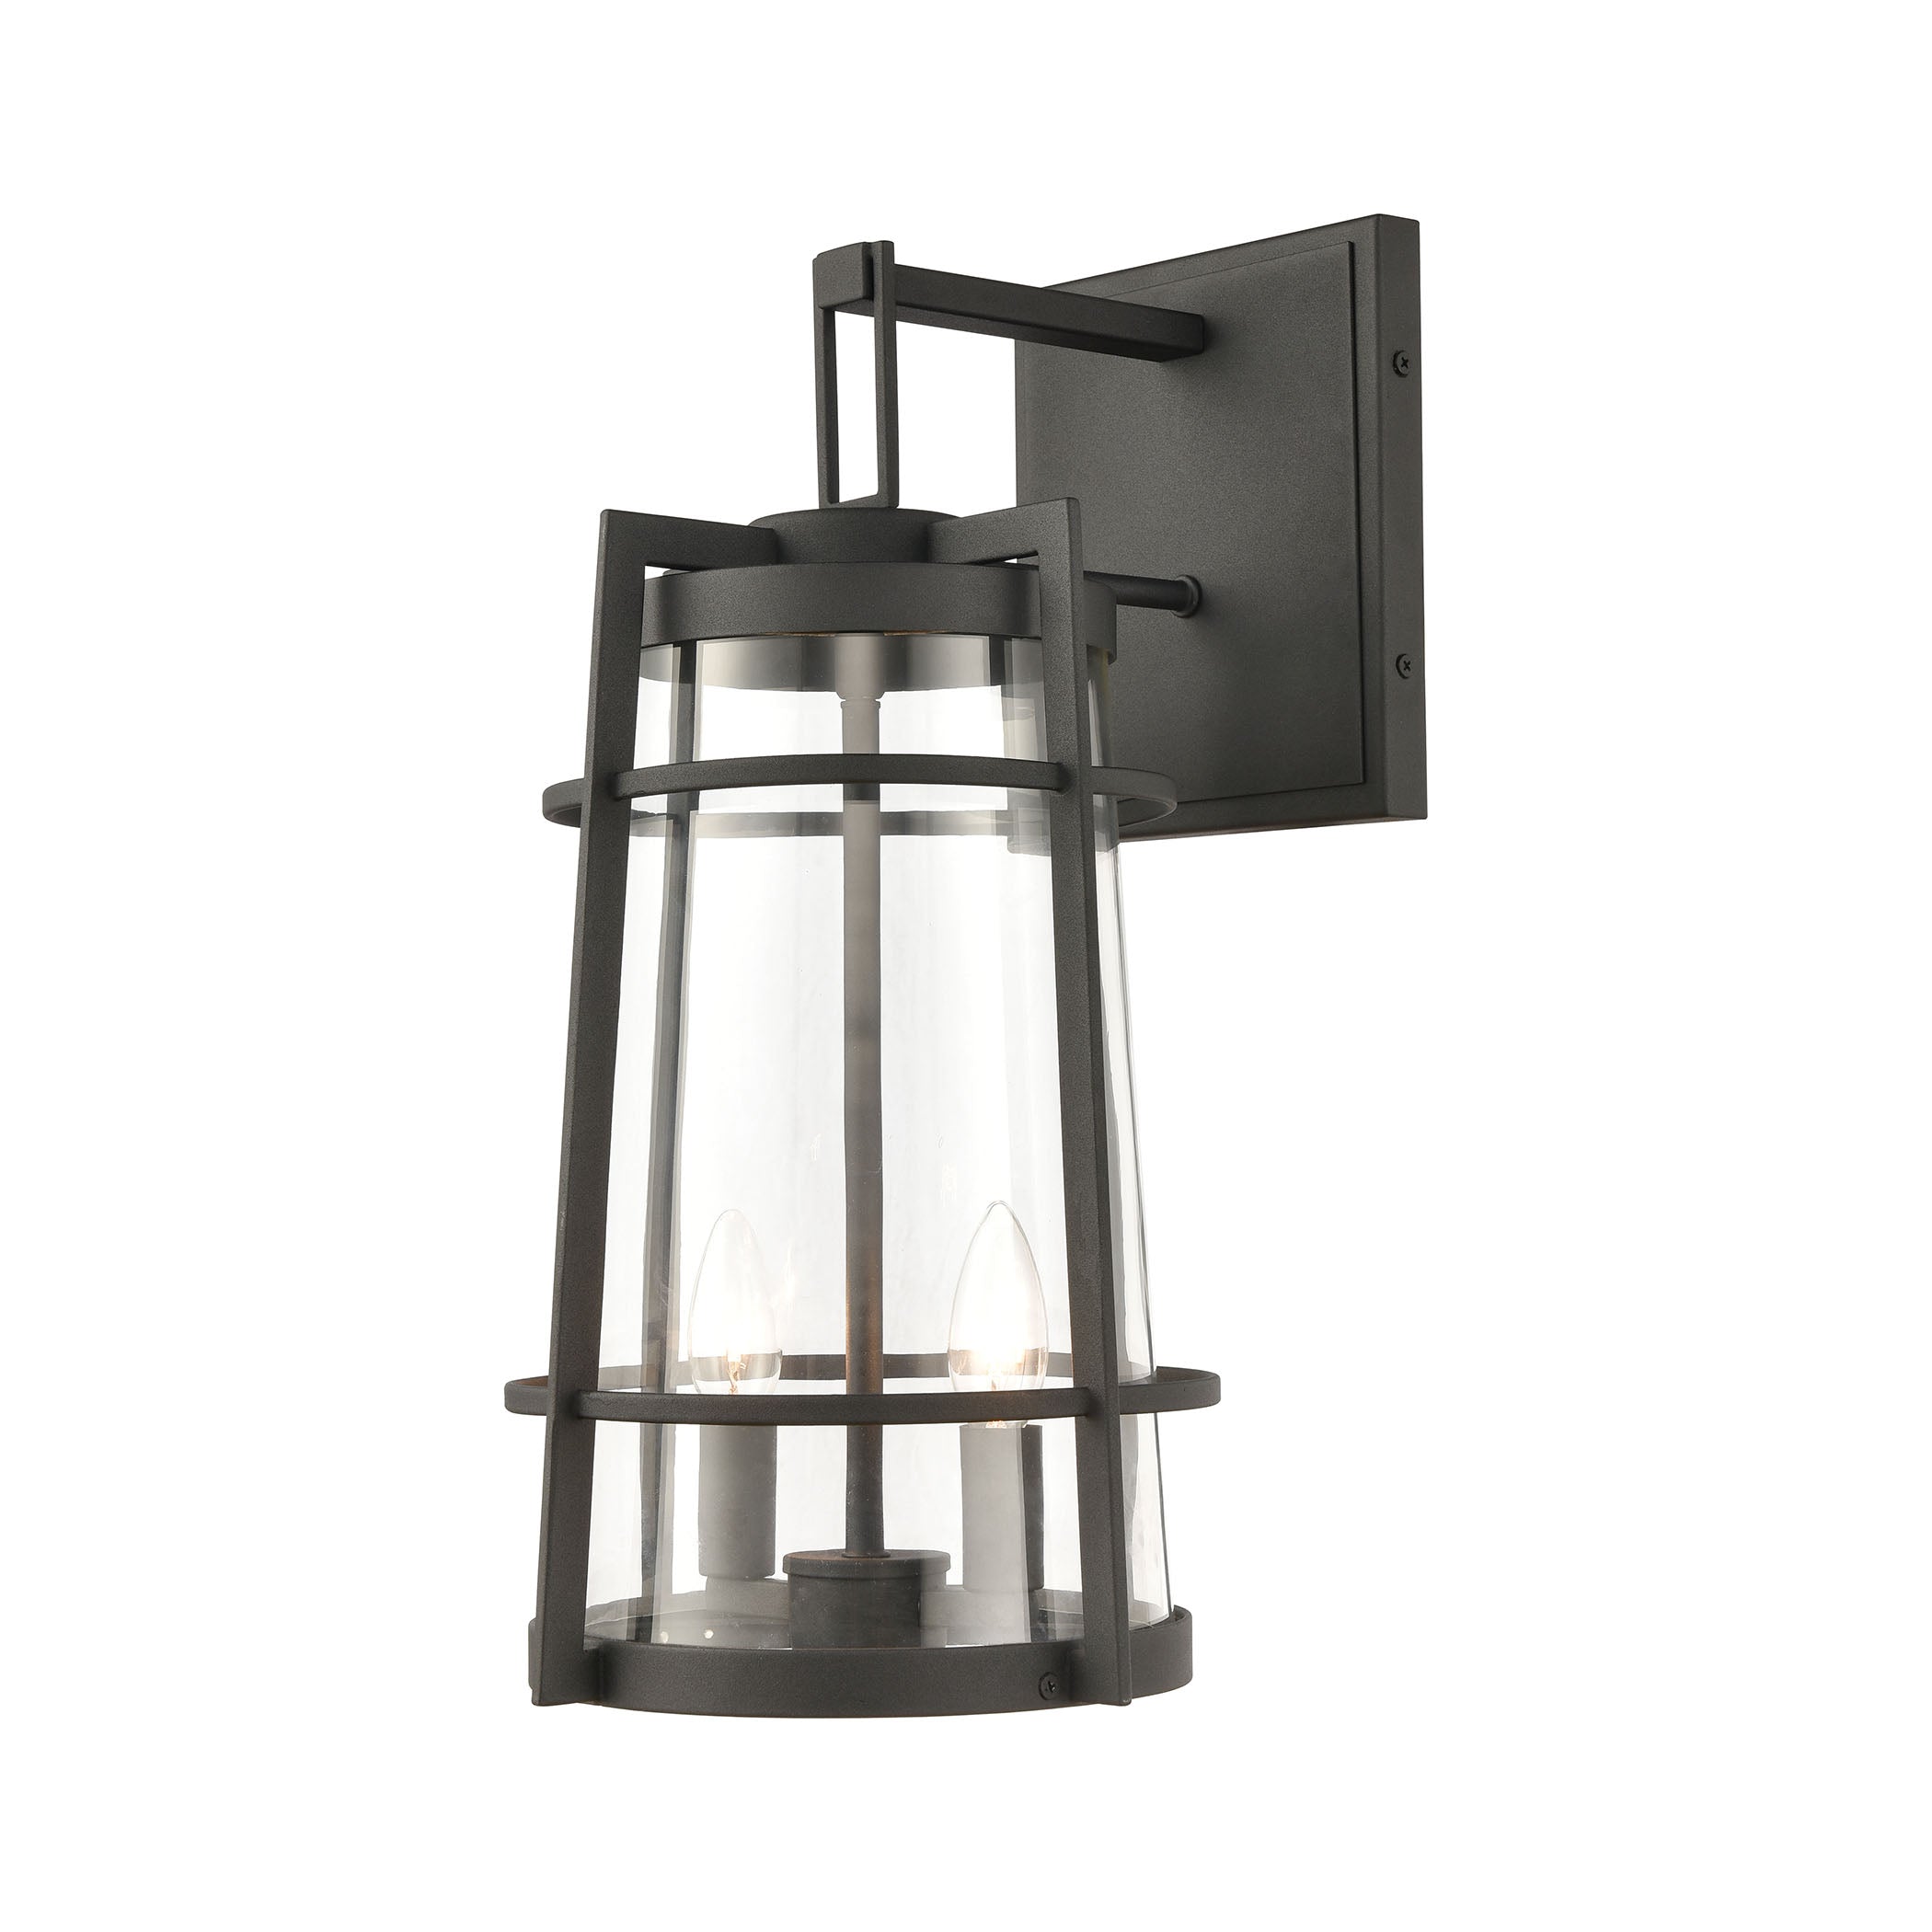 ELK Lighting 45492/2 Crofton 2-Light Outdoor Sconce in Charcoal with Clear Glass